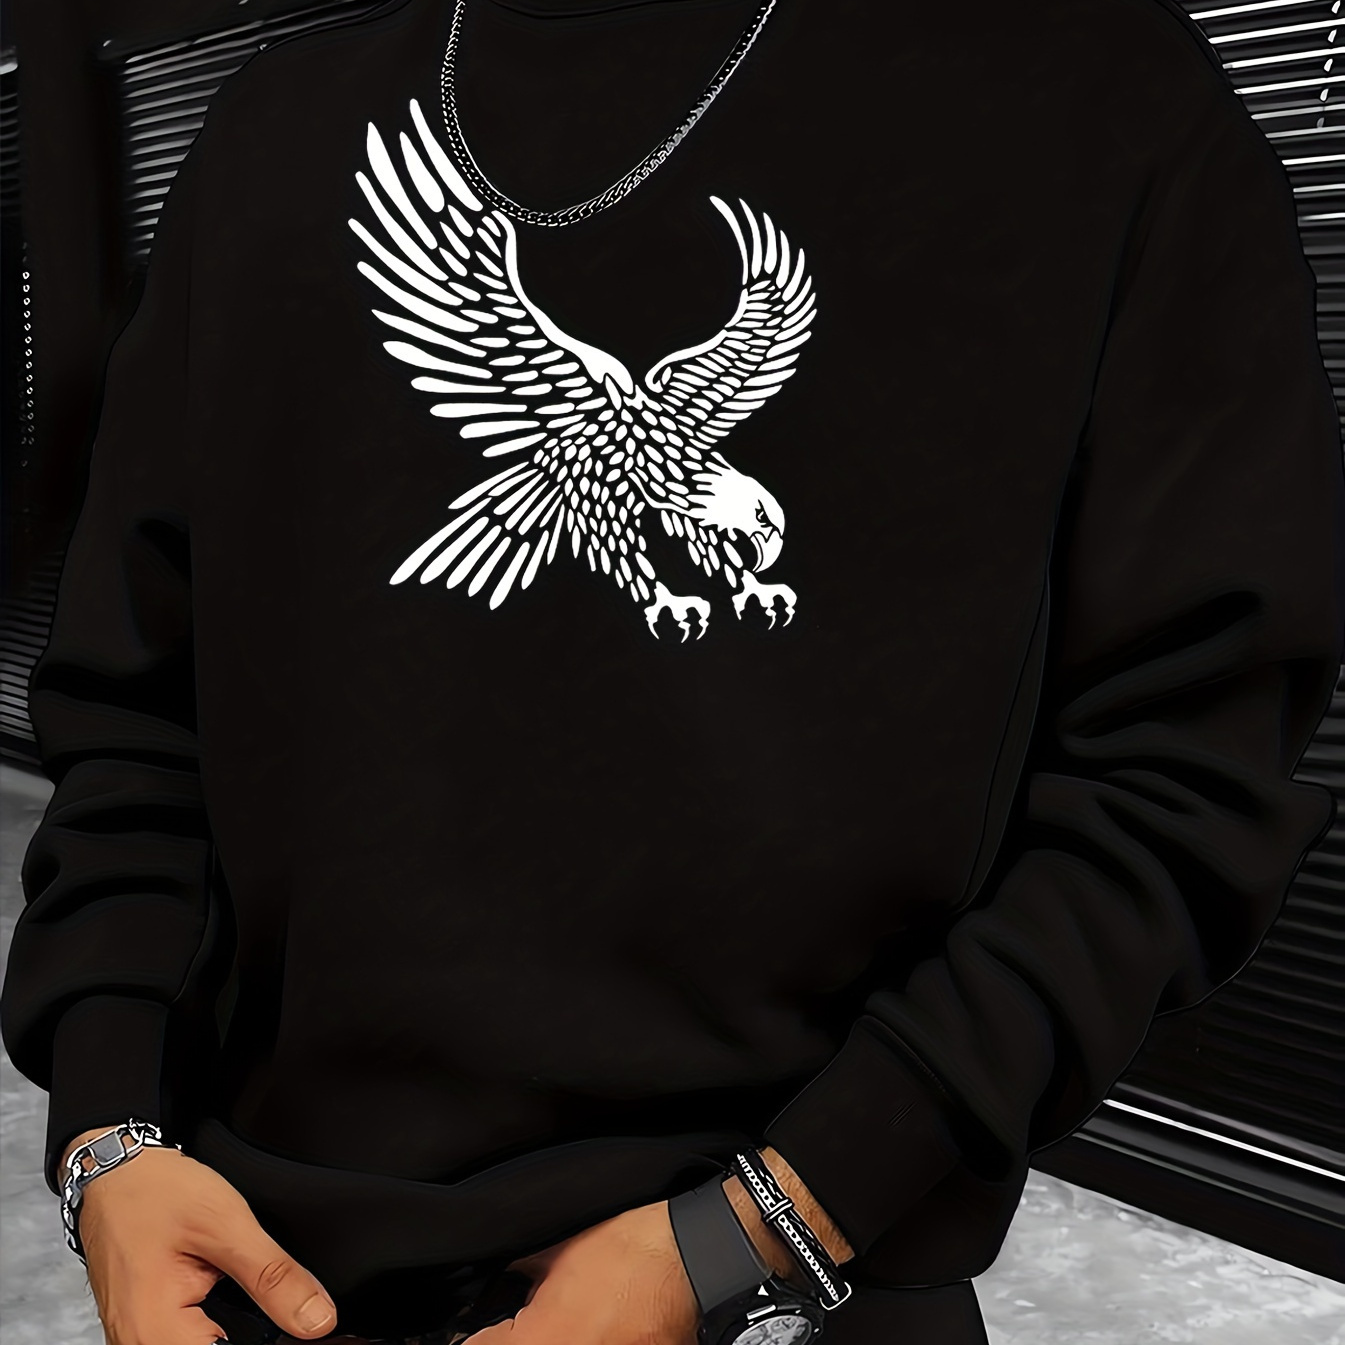 

Eagle Print, Fashionable Crew Neck Pullover Long Sleeve Men's Sweatshirt For Outdoor Sports, For Fall Spring Winter